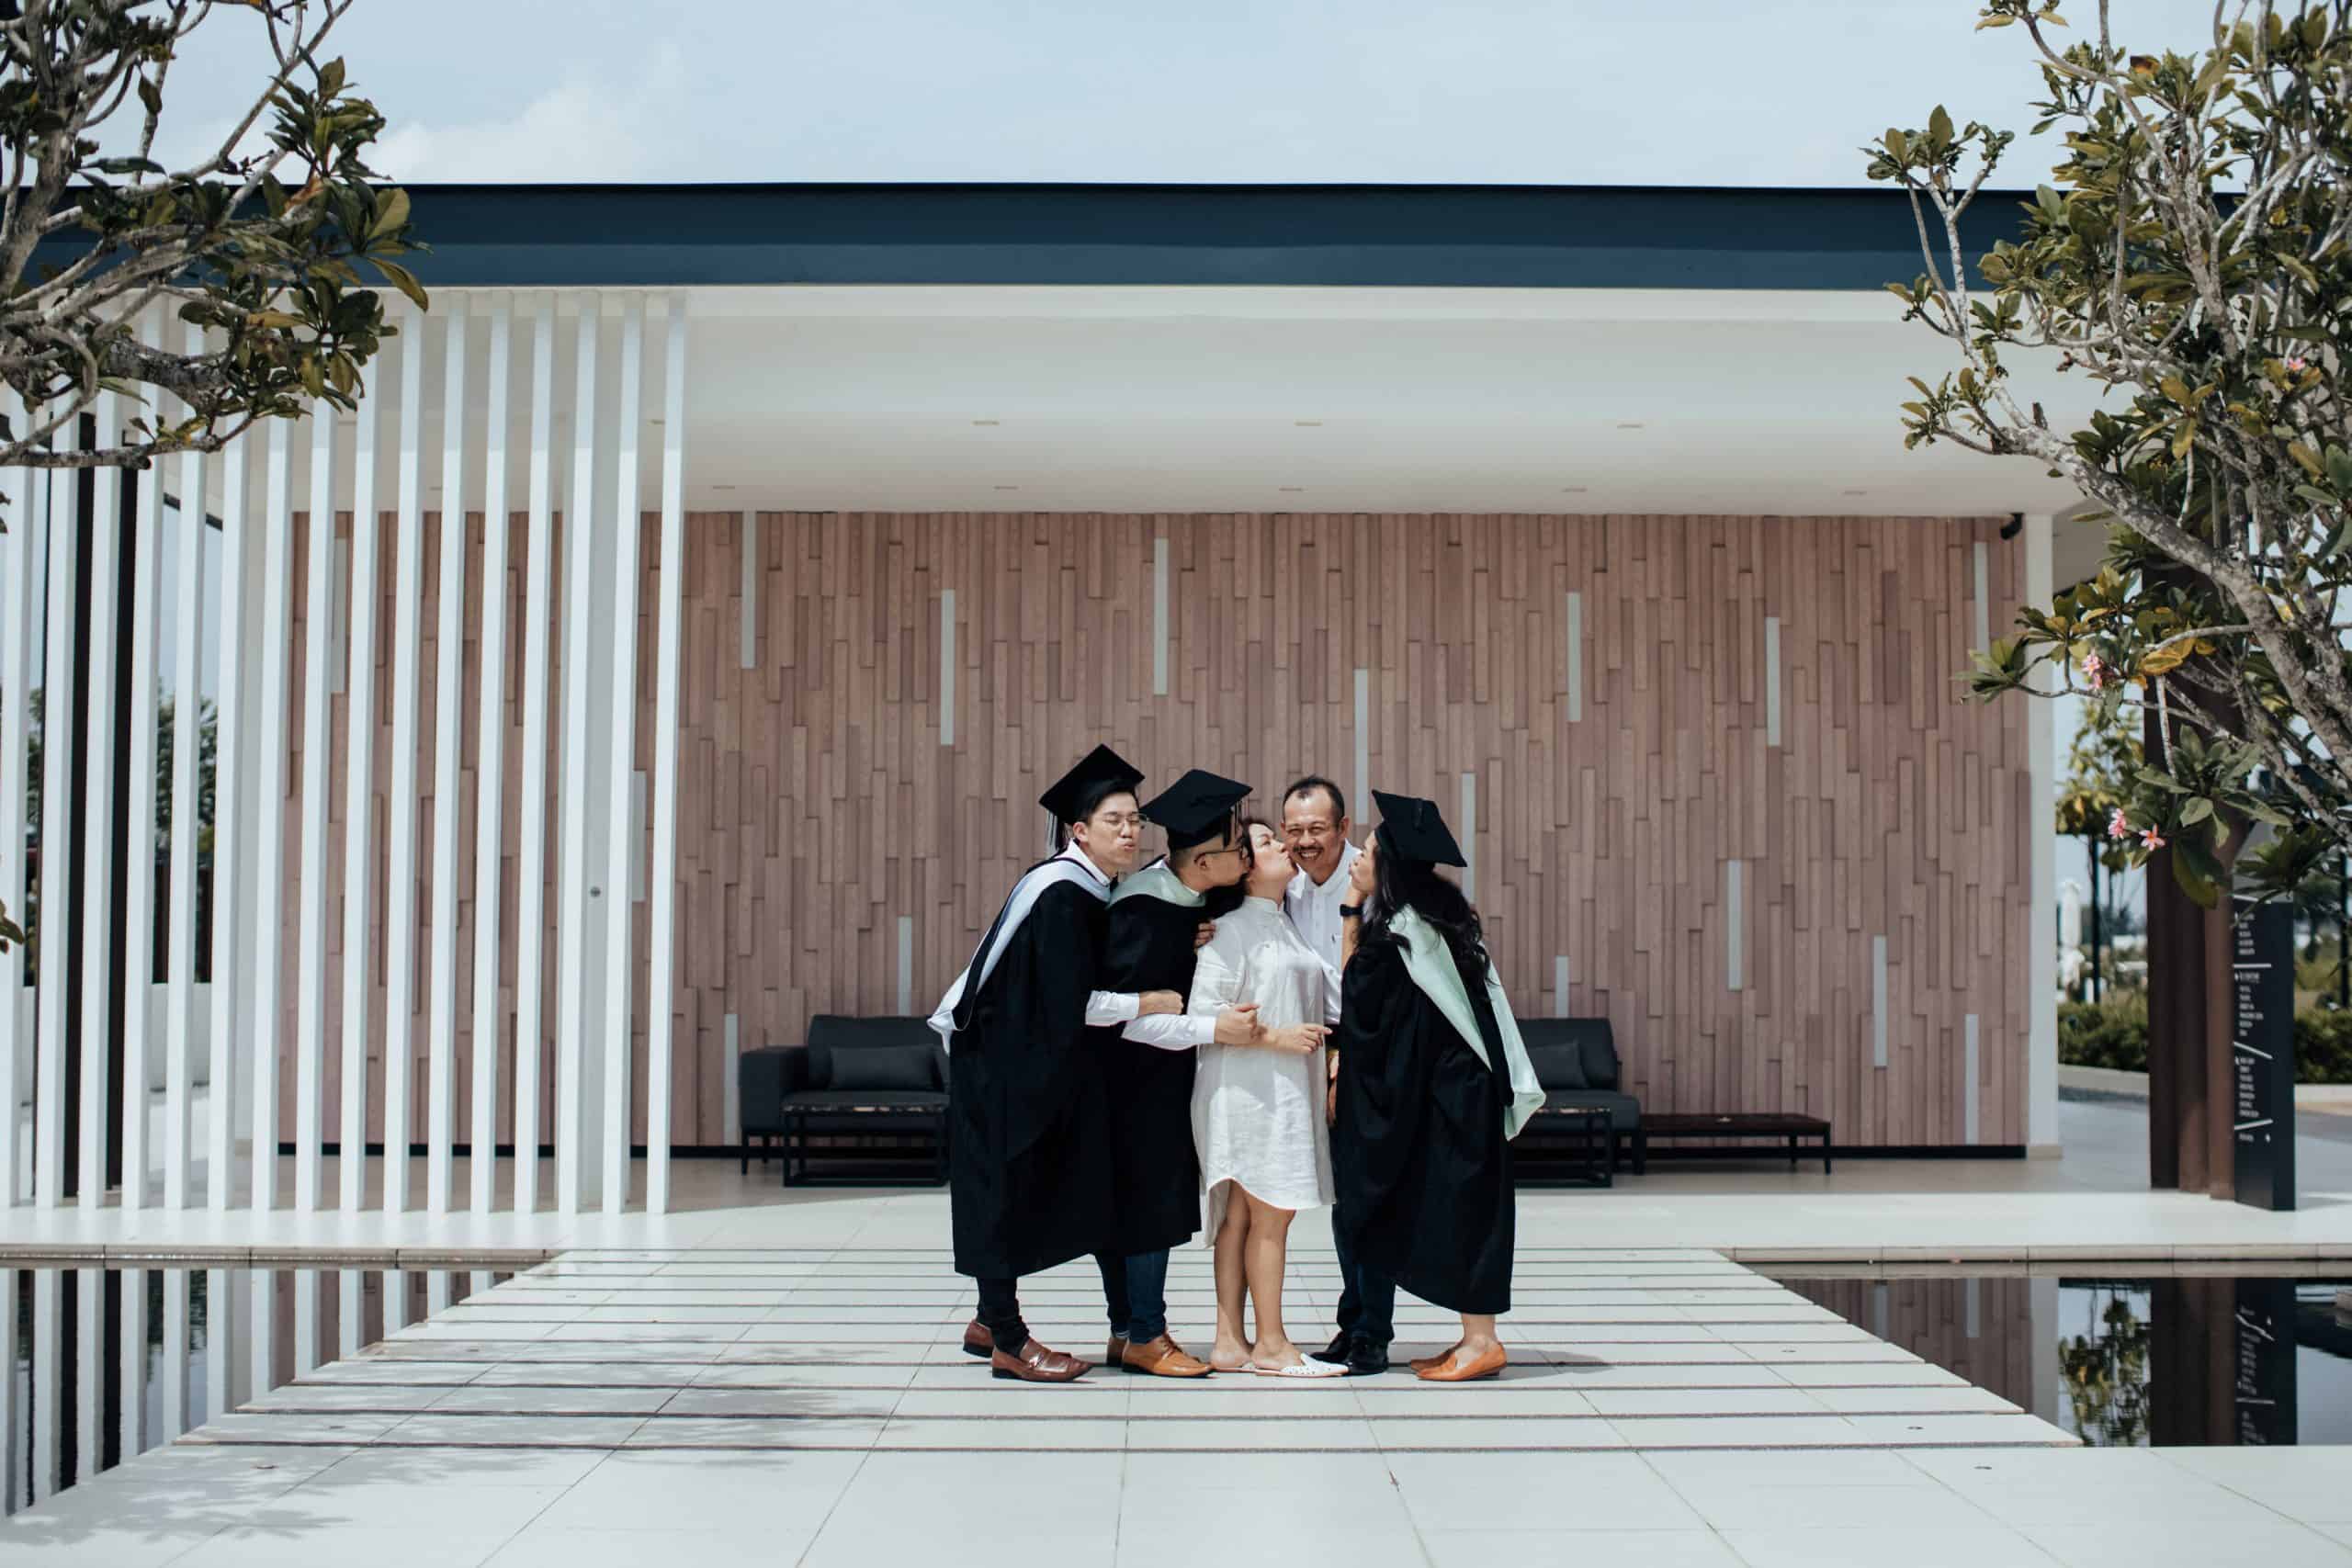 Kuala Lumpur Outdoor Casual Leisure Happy Family and post-graduation Portrait Sesson